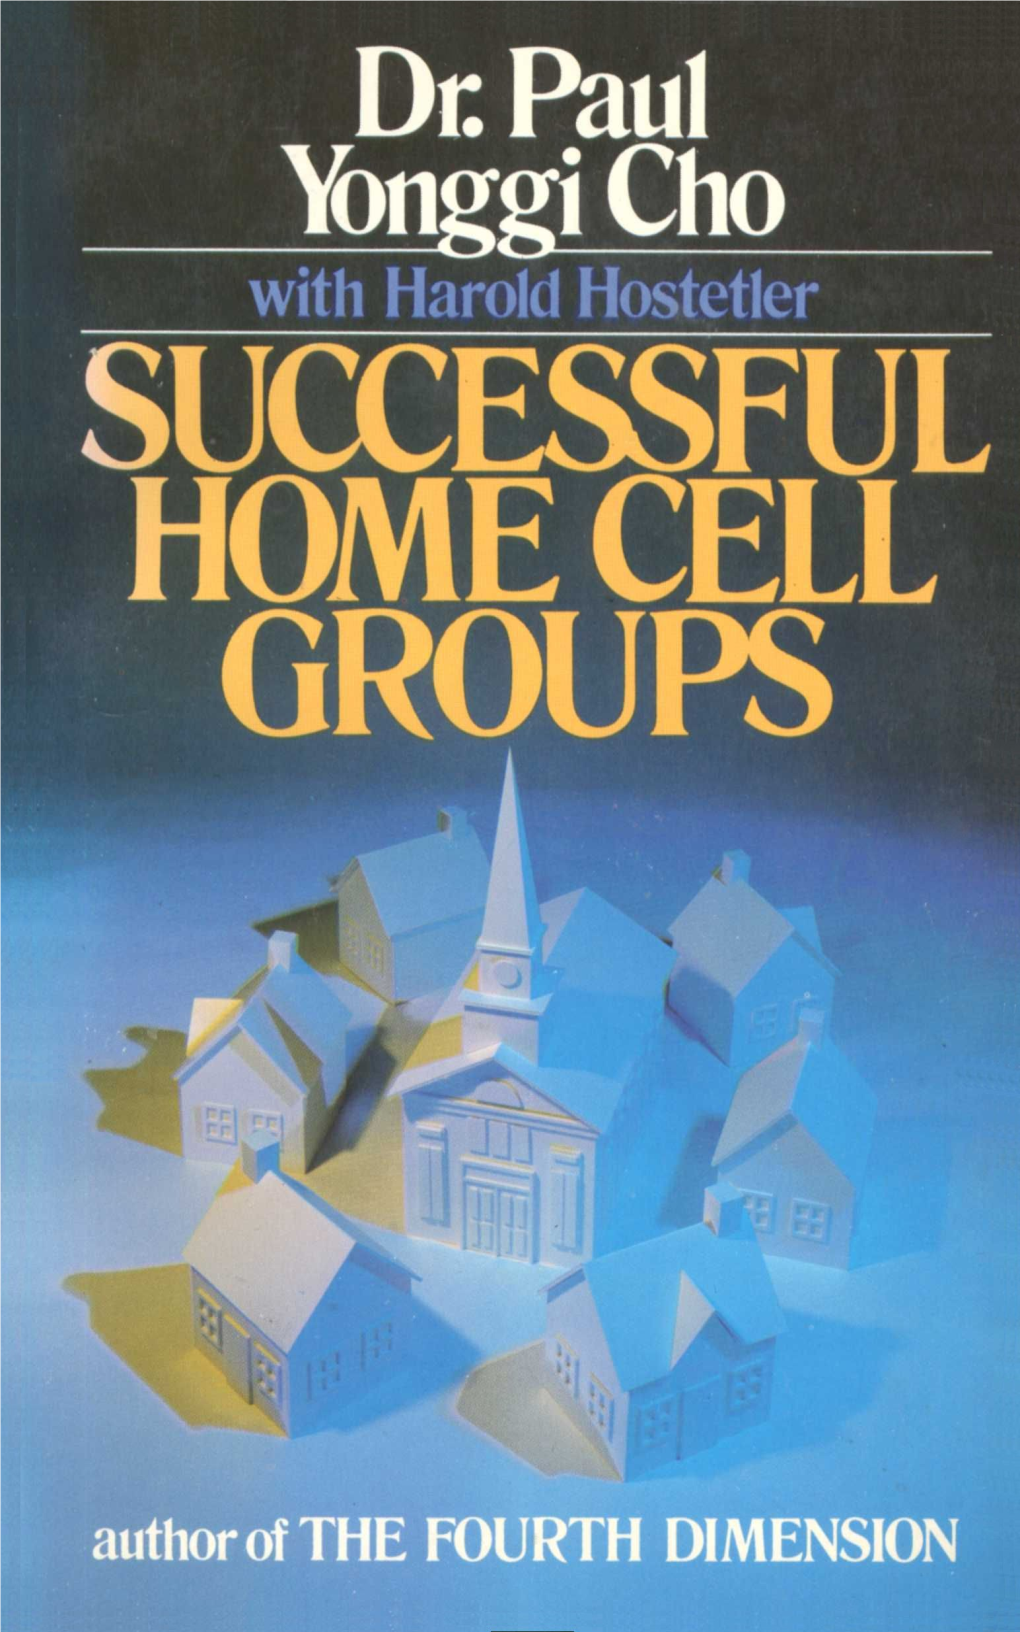 Successful Home Cell Groups by Yonggi